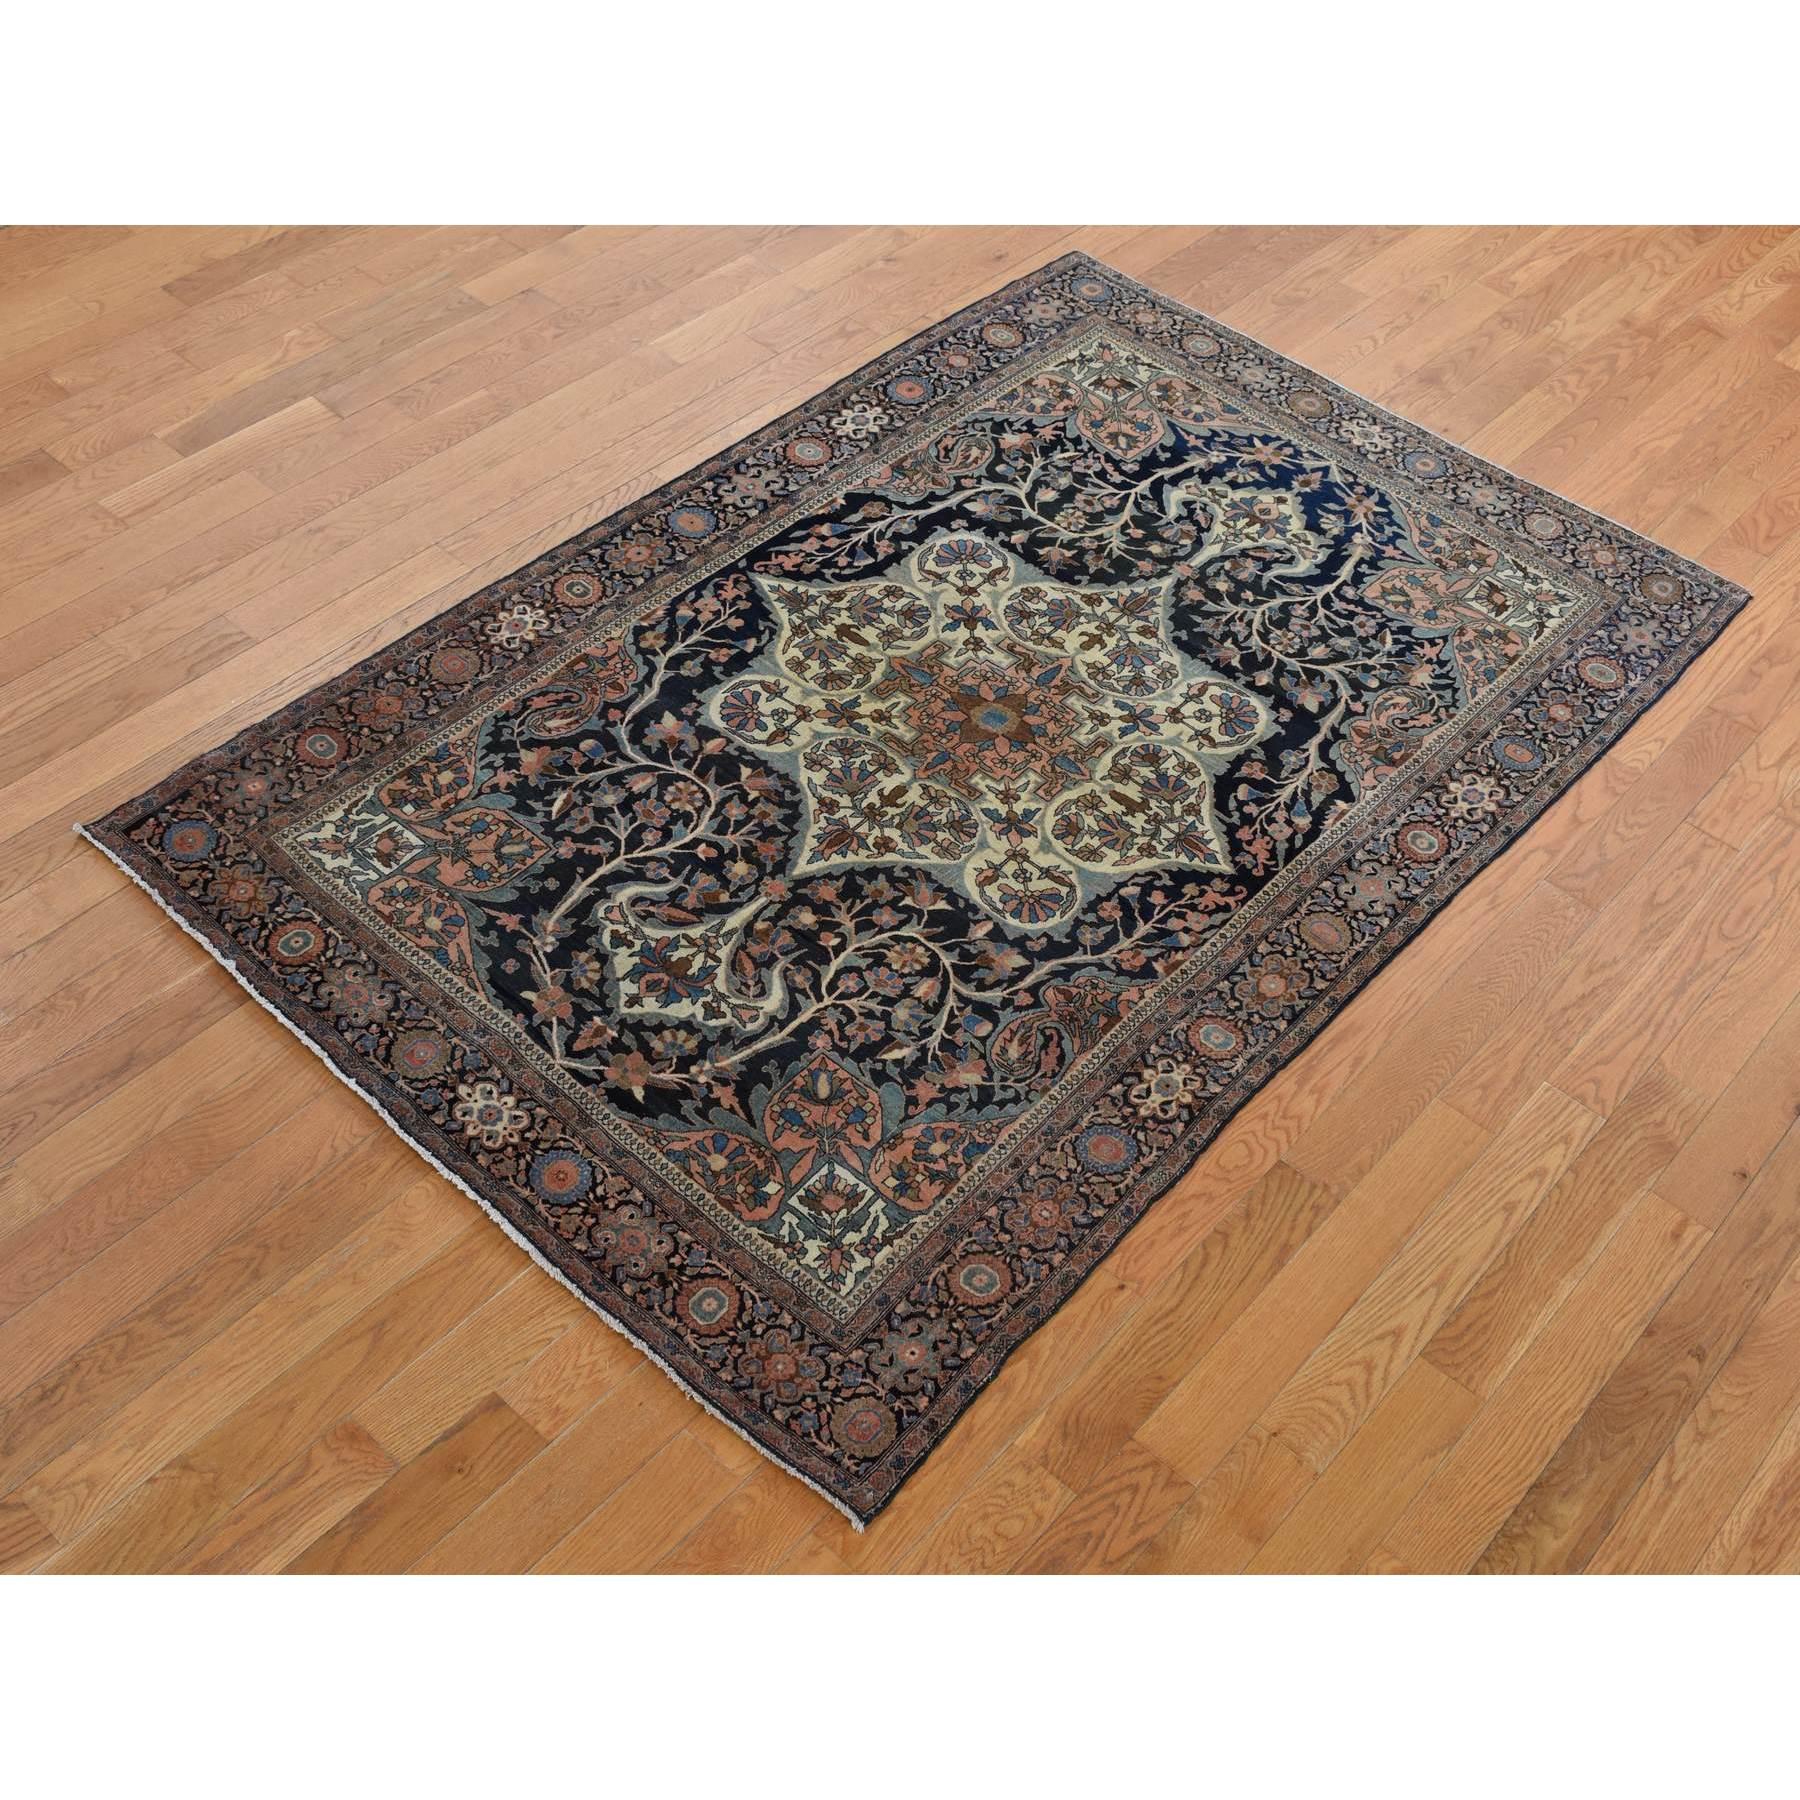 Medieval Brown Antique Persian Fereghan Sarouk Clean Soft Even Wear Wool Hand Knotted Rug For Sale